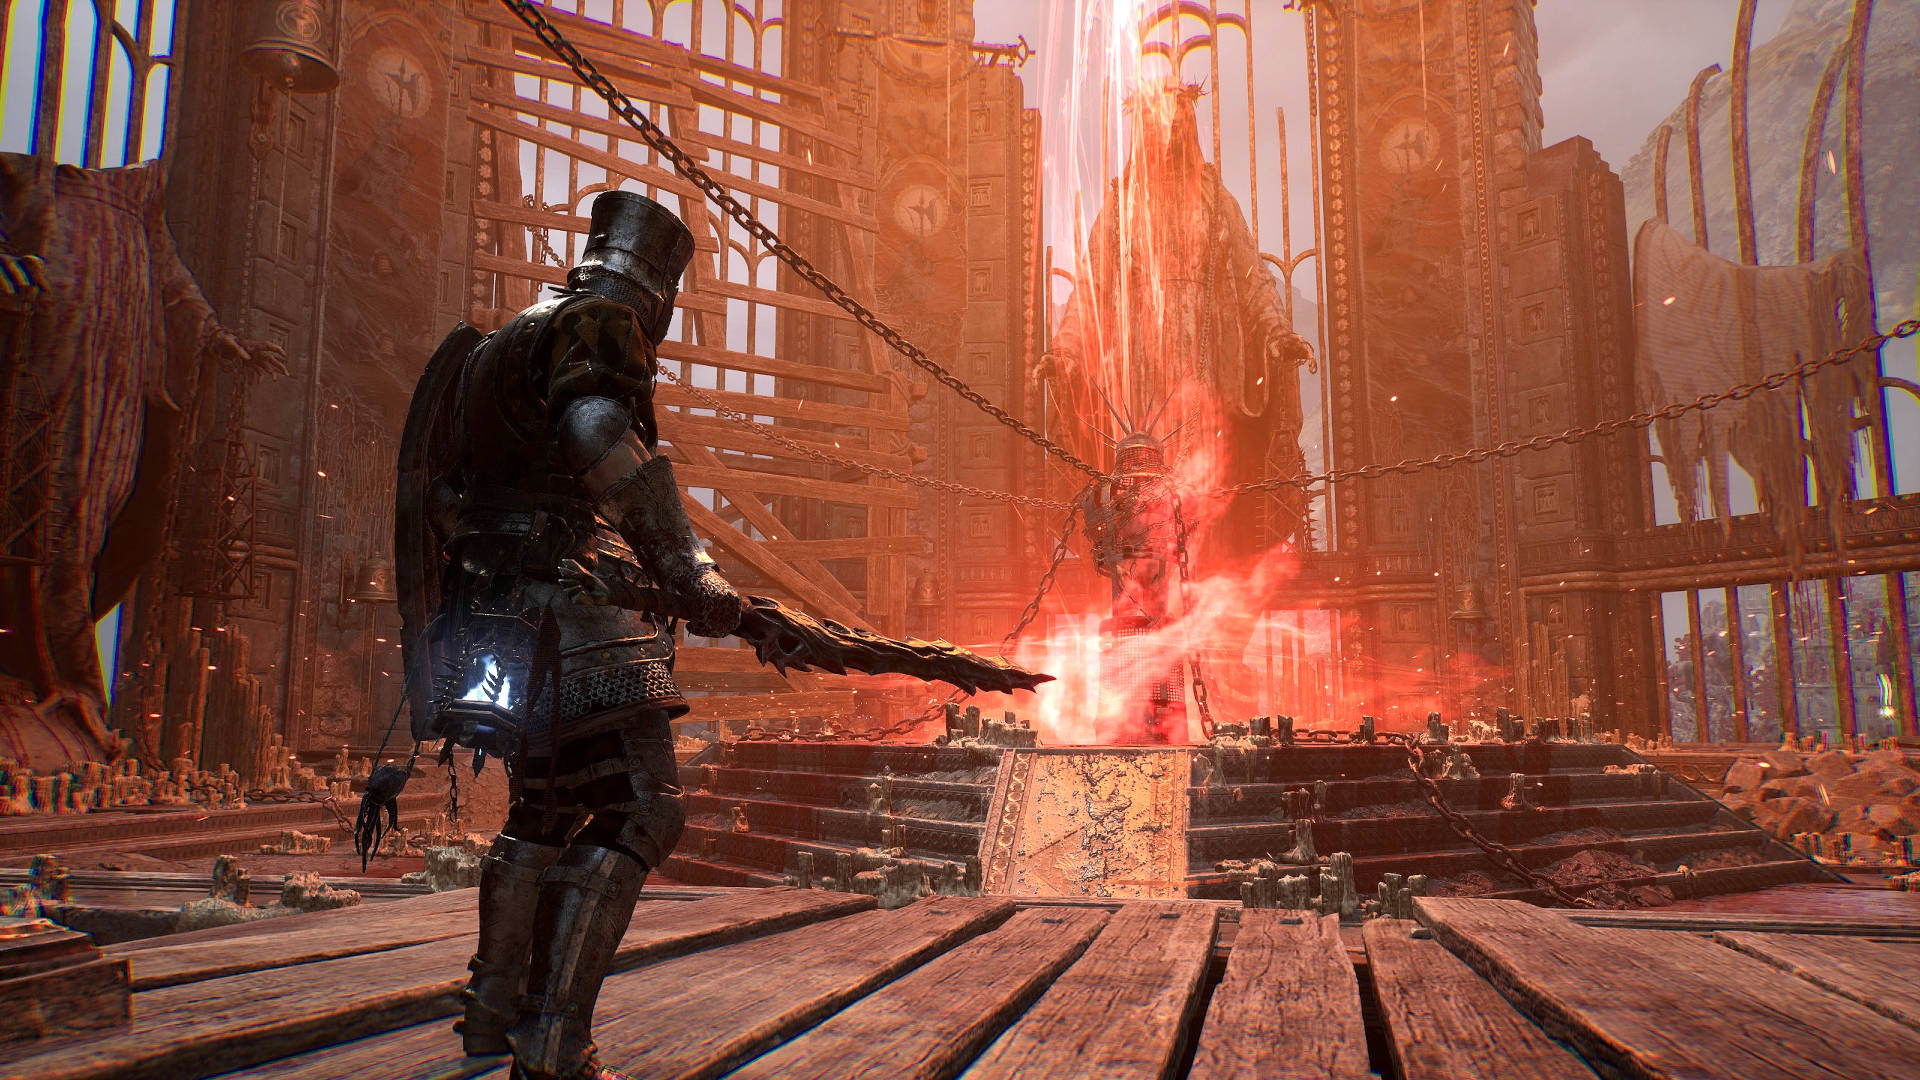 Plus: Lords Of The Fallen knocks down the doors!